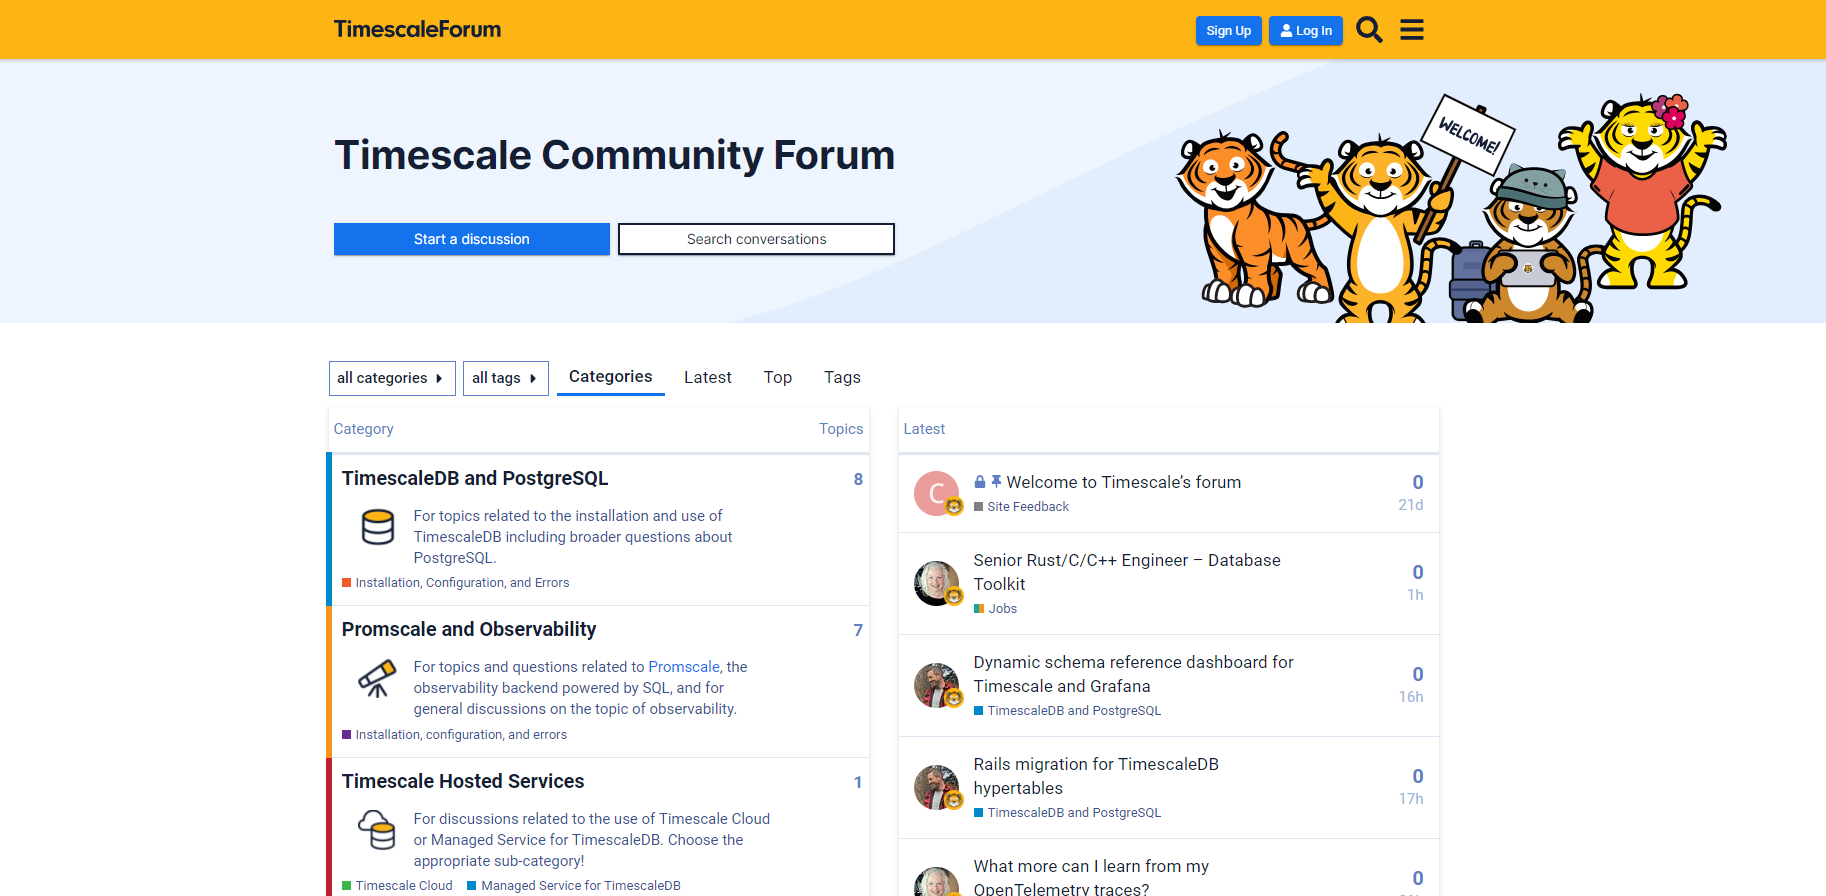 Listening to the developer community yields benefits: Introducing Timescale’s community forum